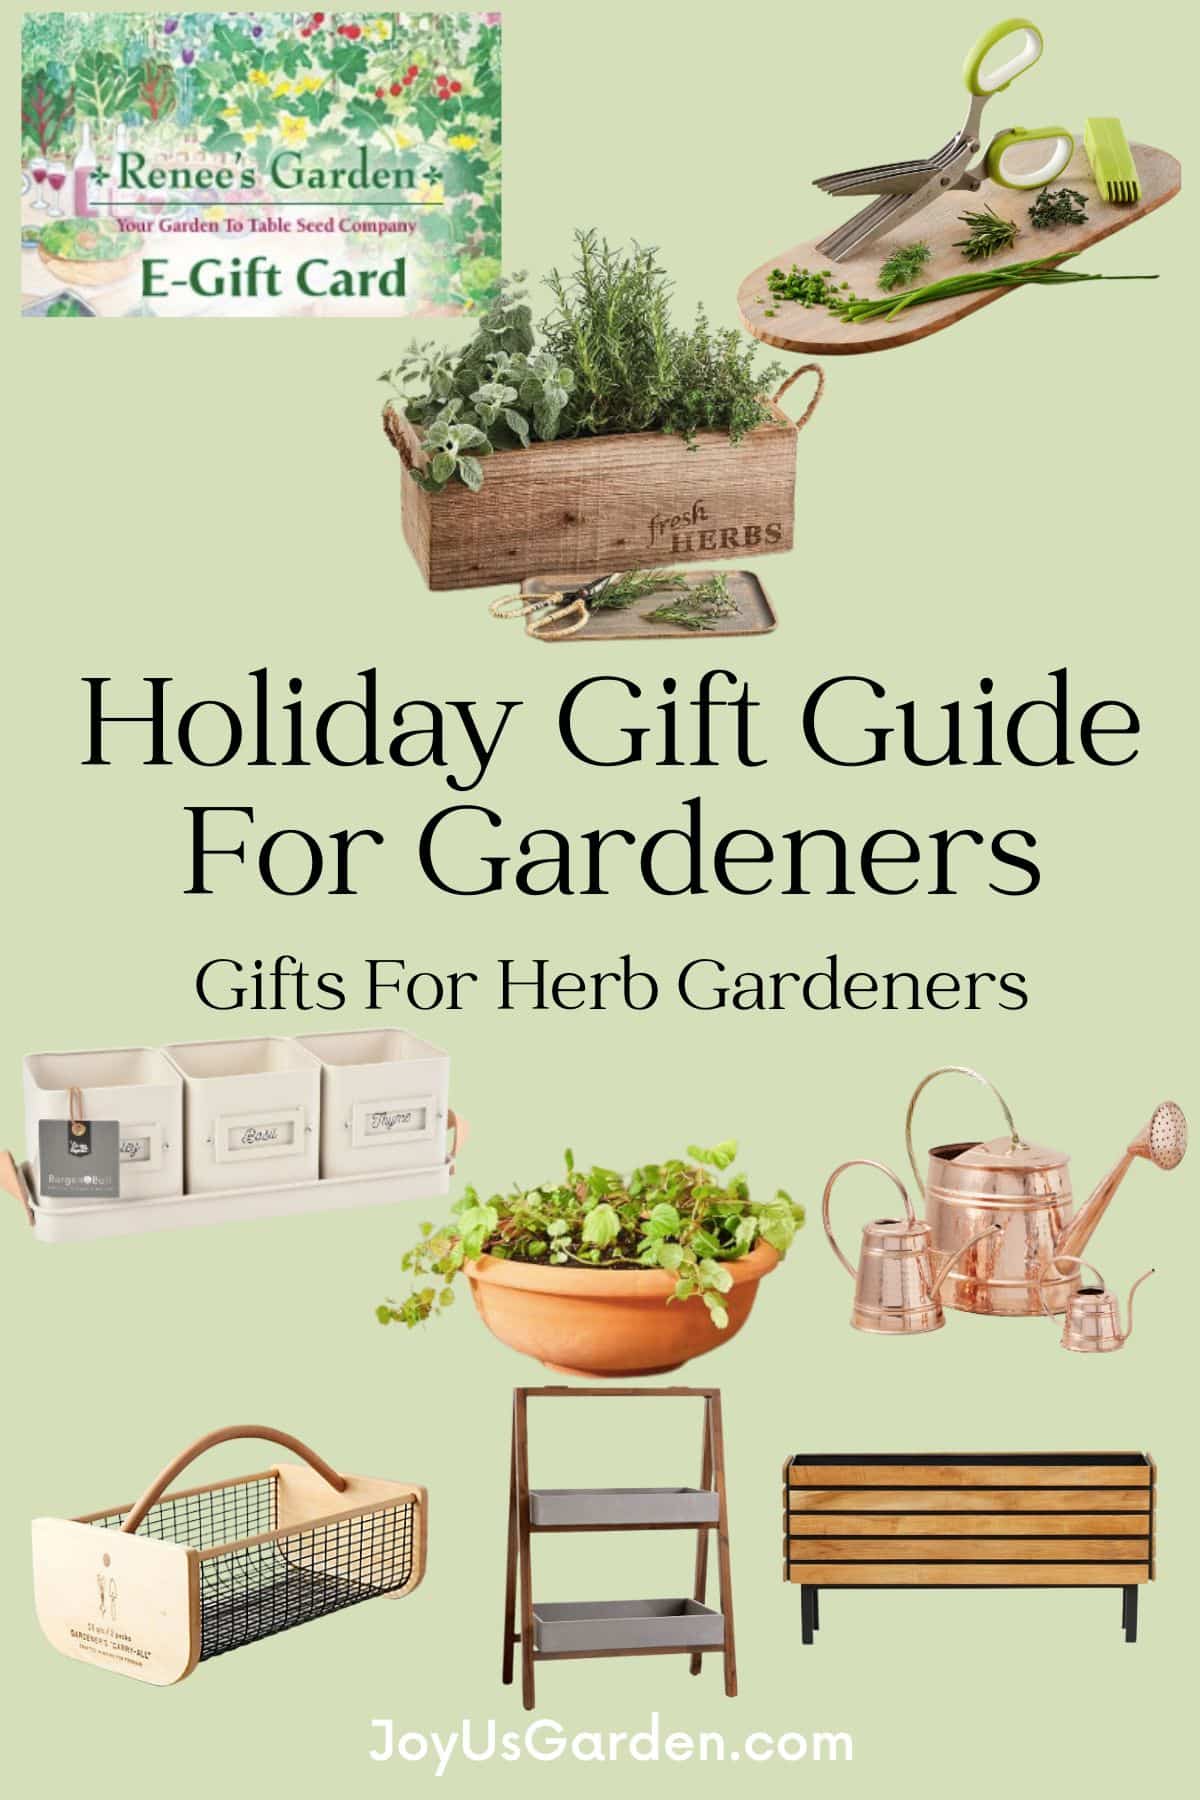 Canva collage of products that can be bought for herb gardeners.